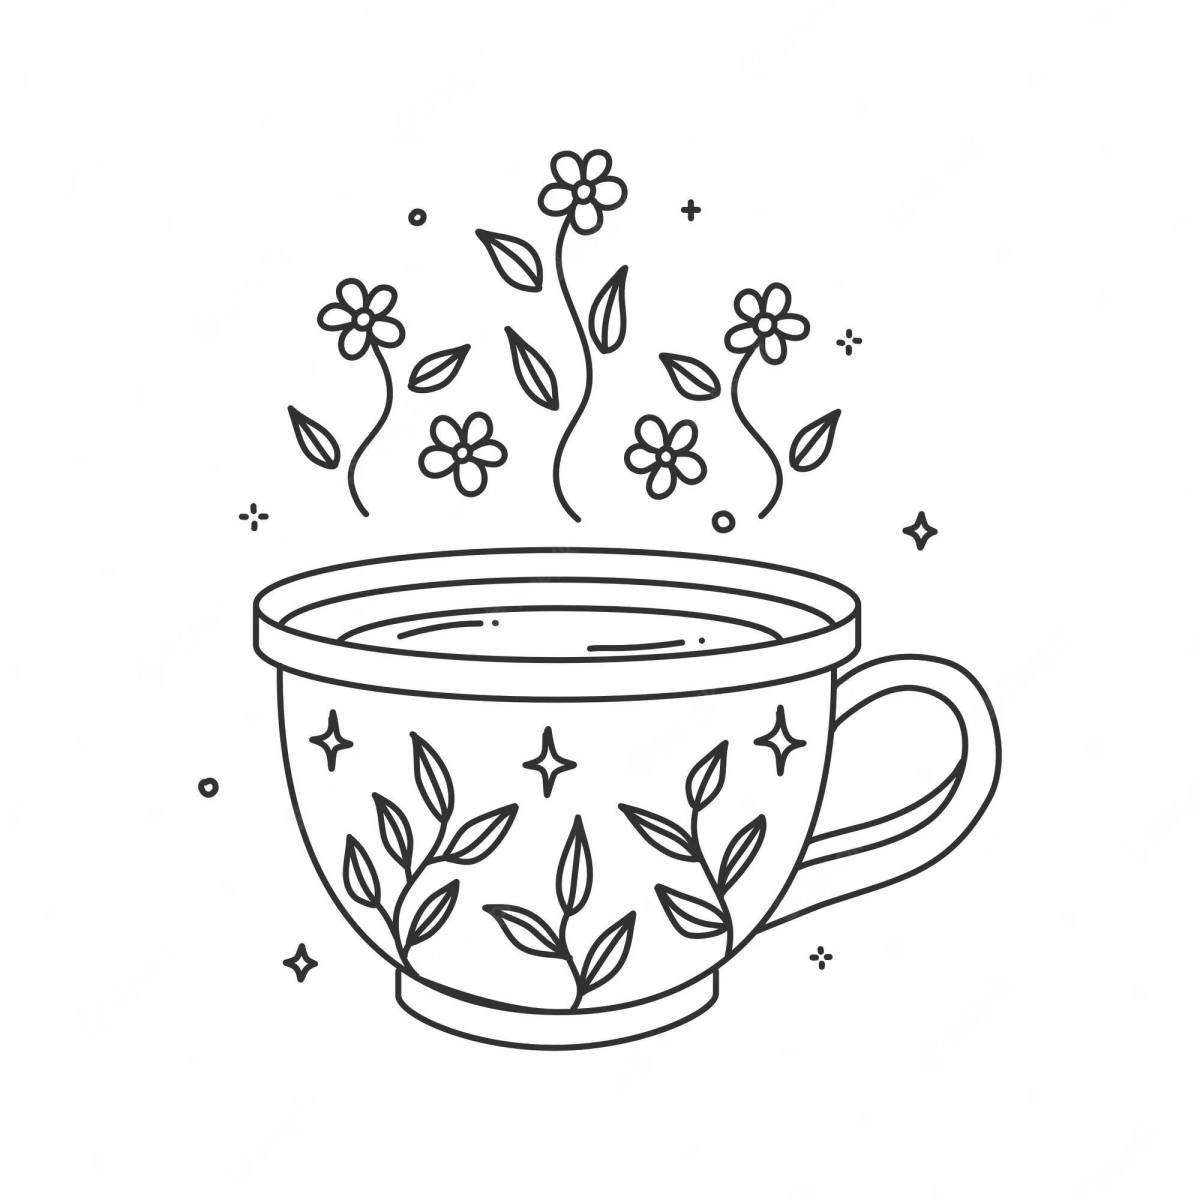 Coloring book funny cup of tea